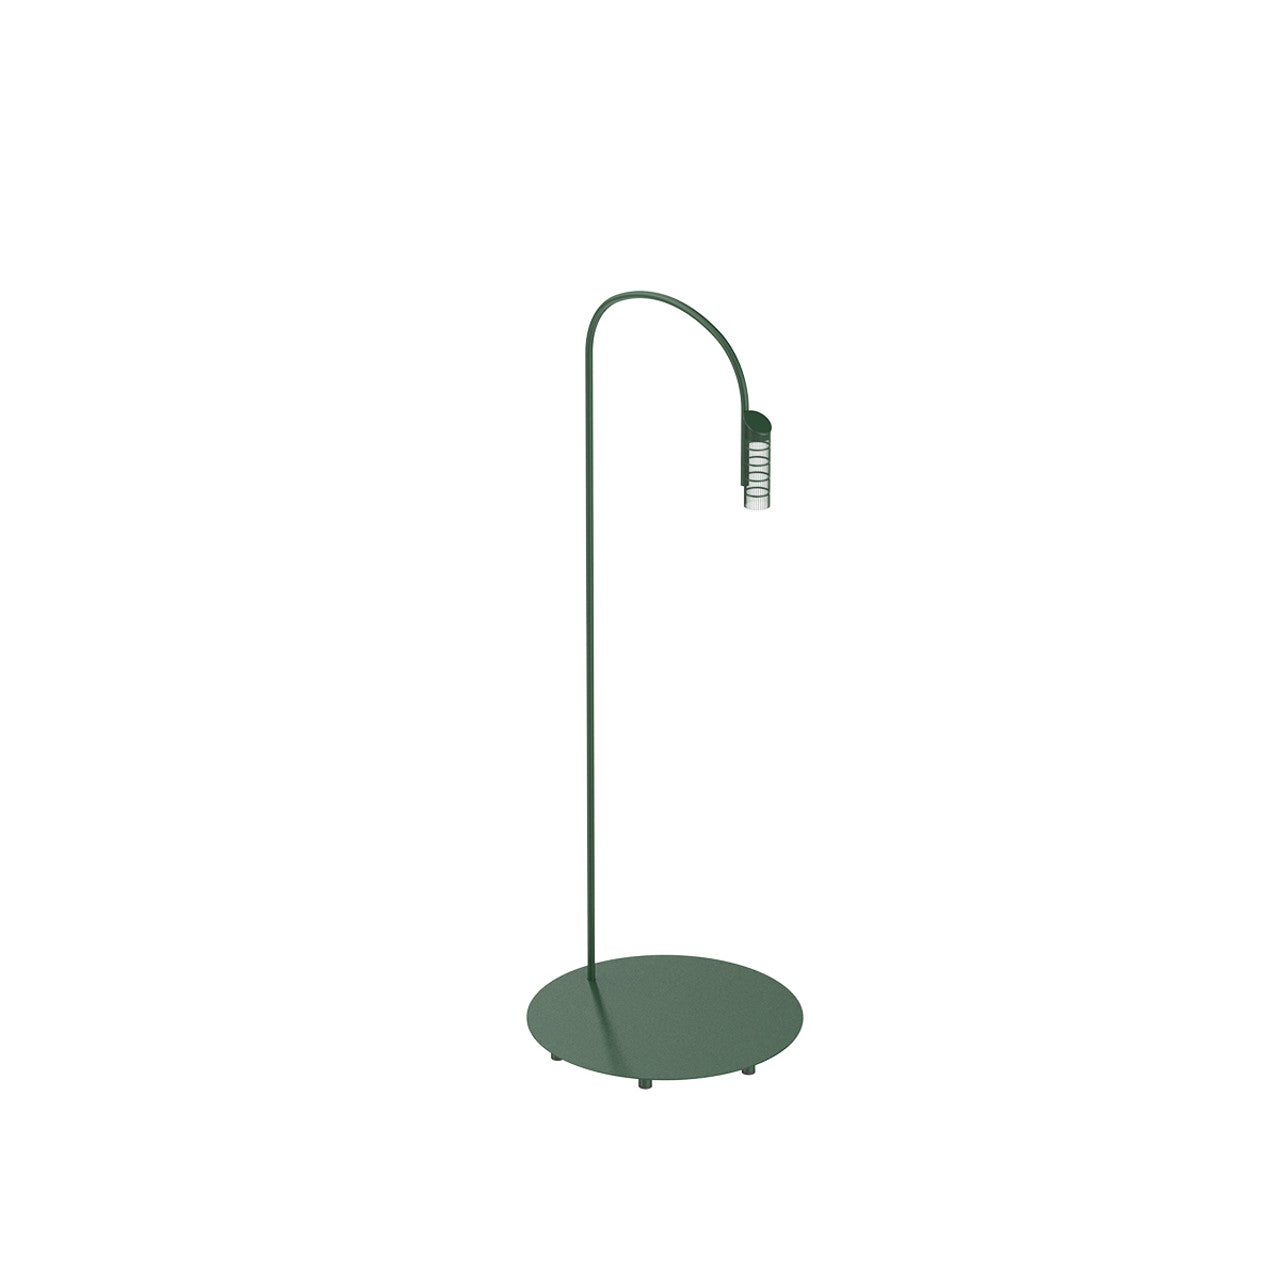 Flos Caule 3000K Model 3 Outdoor Floor Lamp in Forest Green with Nest Shade